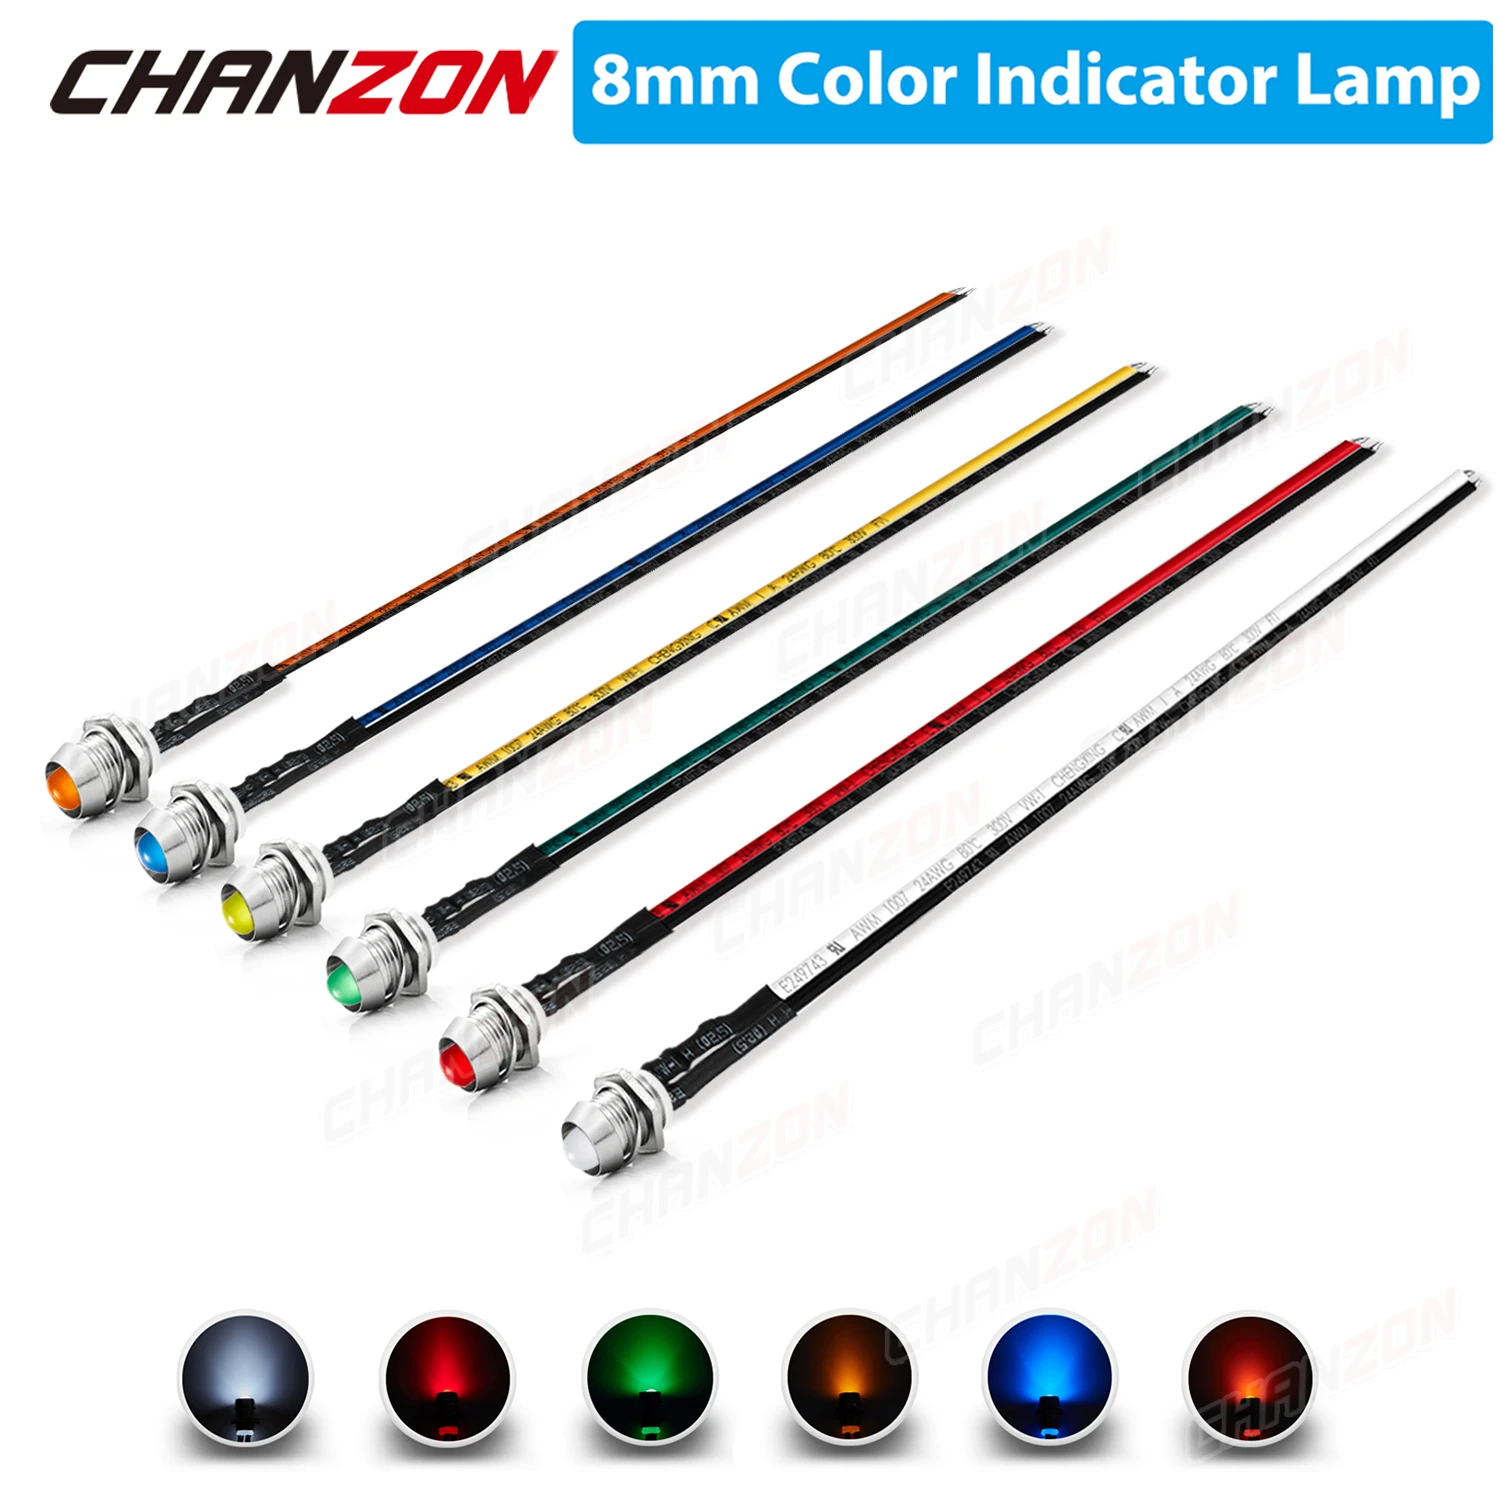 5mm Prewired LED Kit 12V Diffused Light Emitting Diode Indicator Lamp Bulb White Red Green Blue Yellow Orange With 8mm Holder